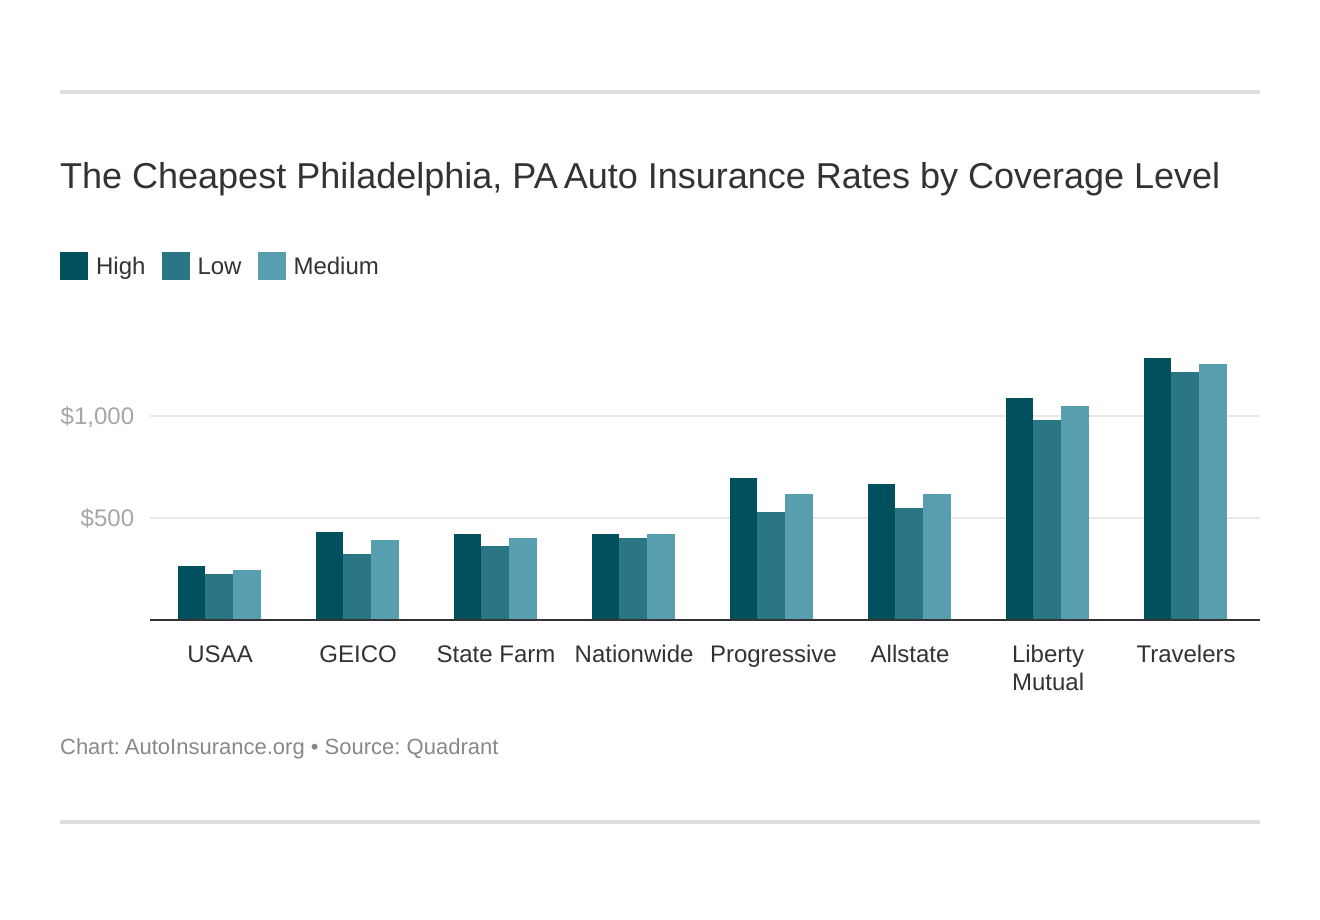 The Cheapest Philadelphia, PA Auto Insurance Rates by Coverage Level